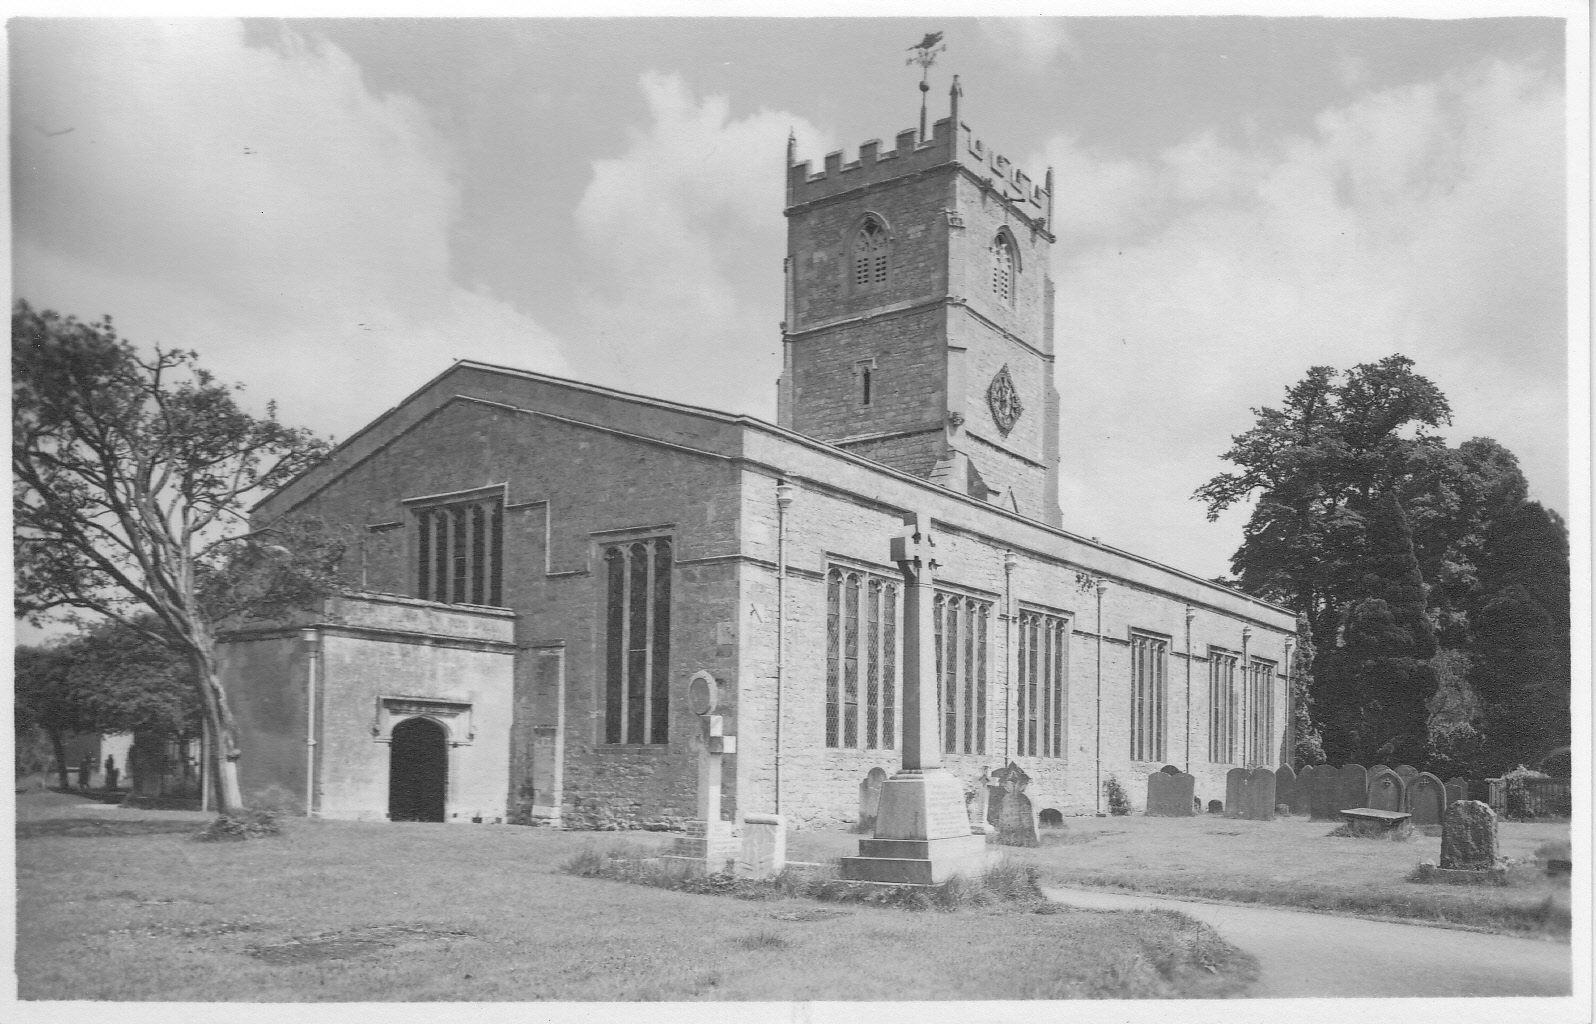 A lovely shot of the church from 1955. Photo courtesy of Paul Williams.